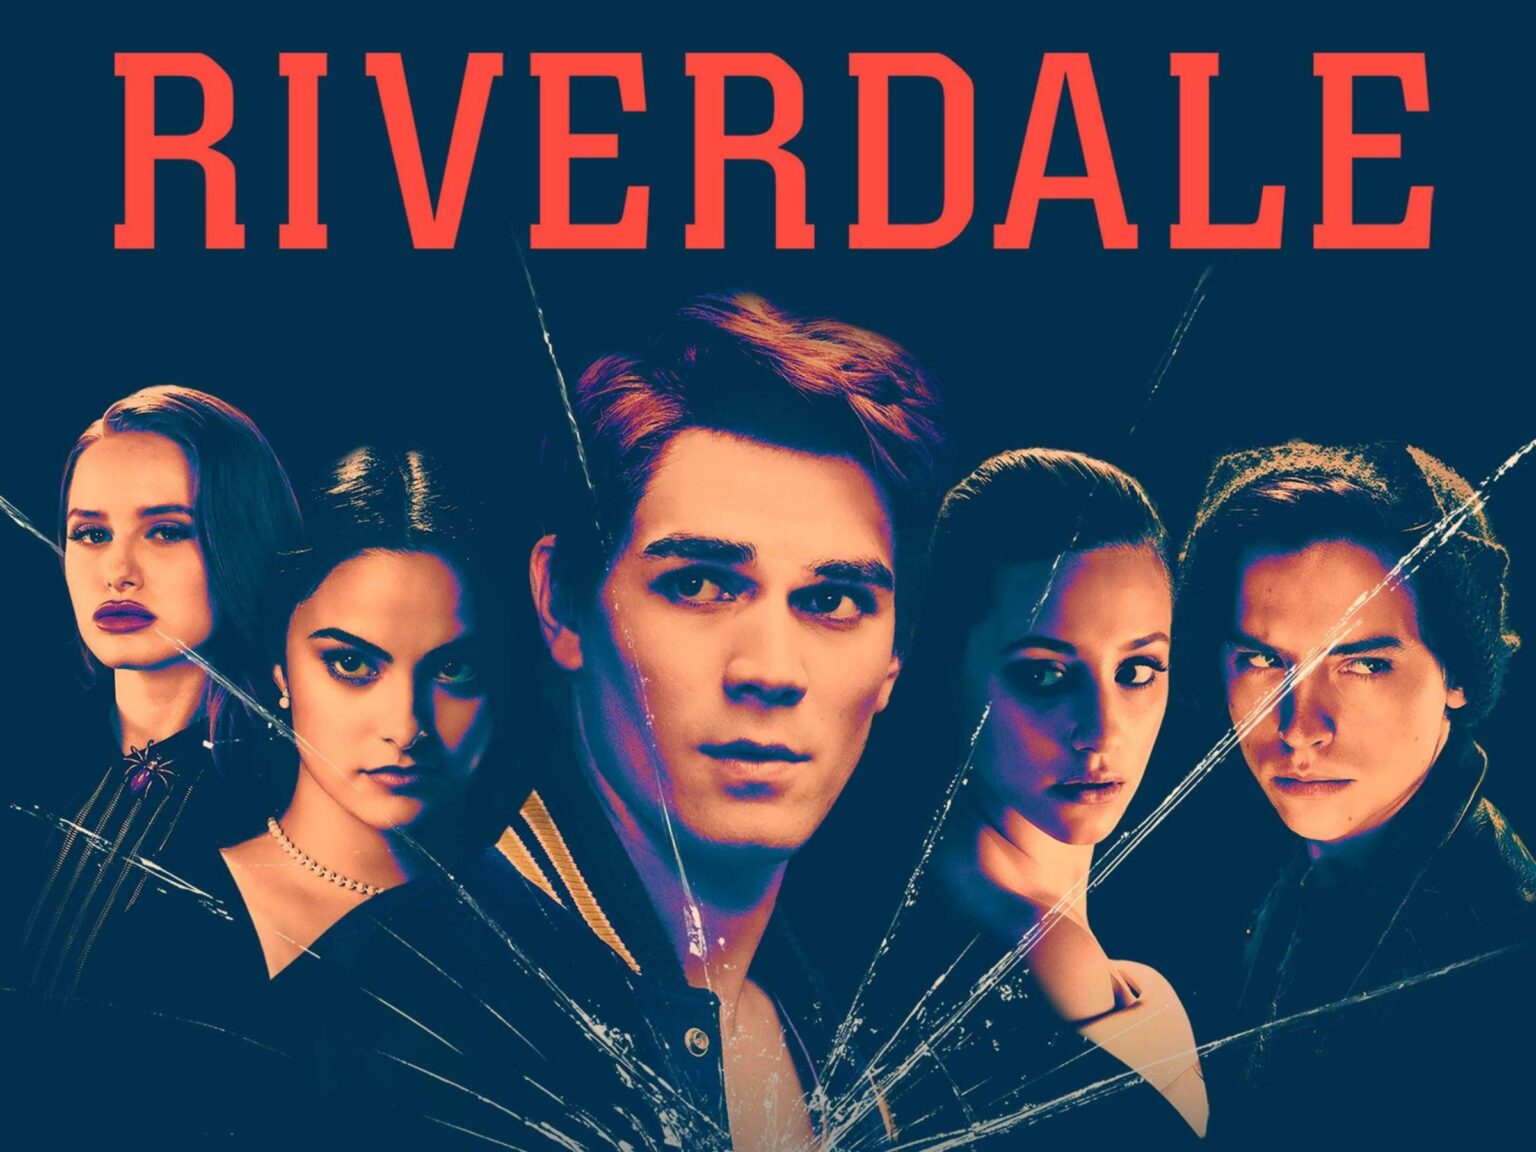 Get your limo ready because 'Riverdale' has invited us to their senior prom in season 5. Check out the latest teaser images.